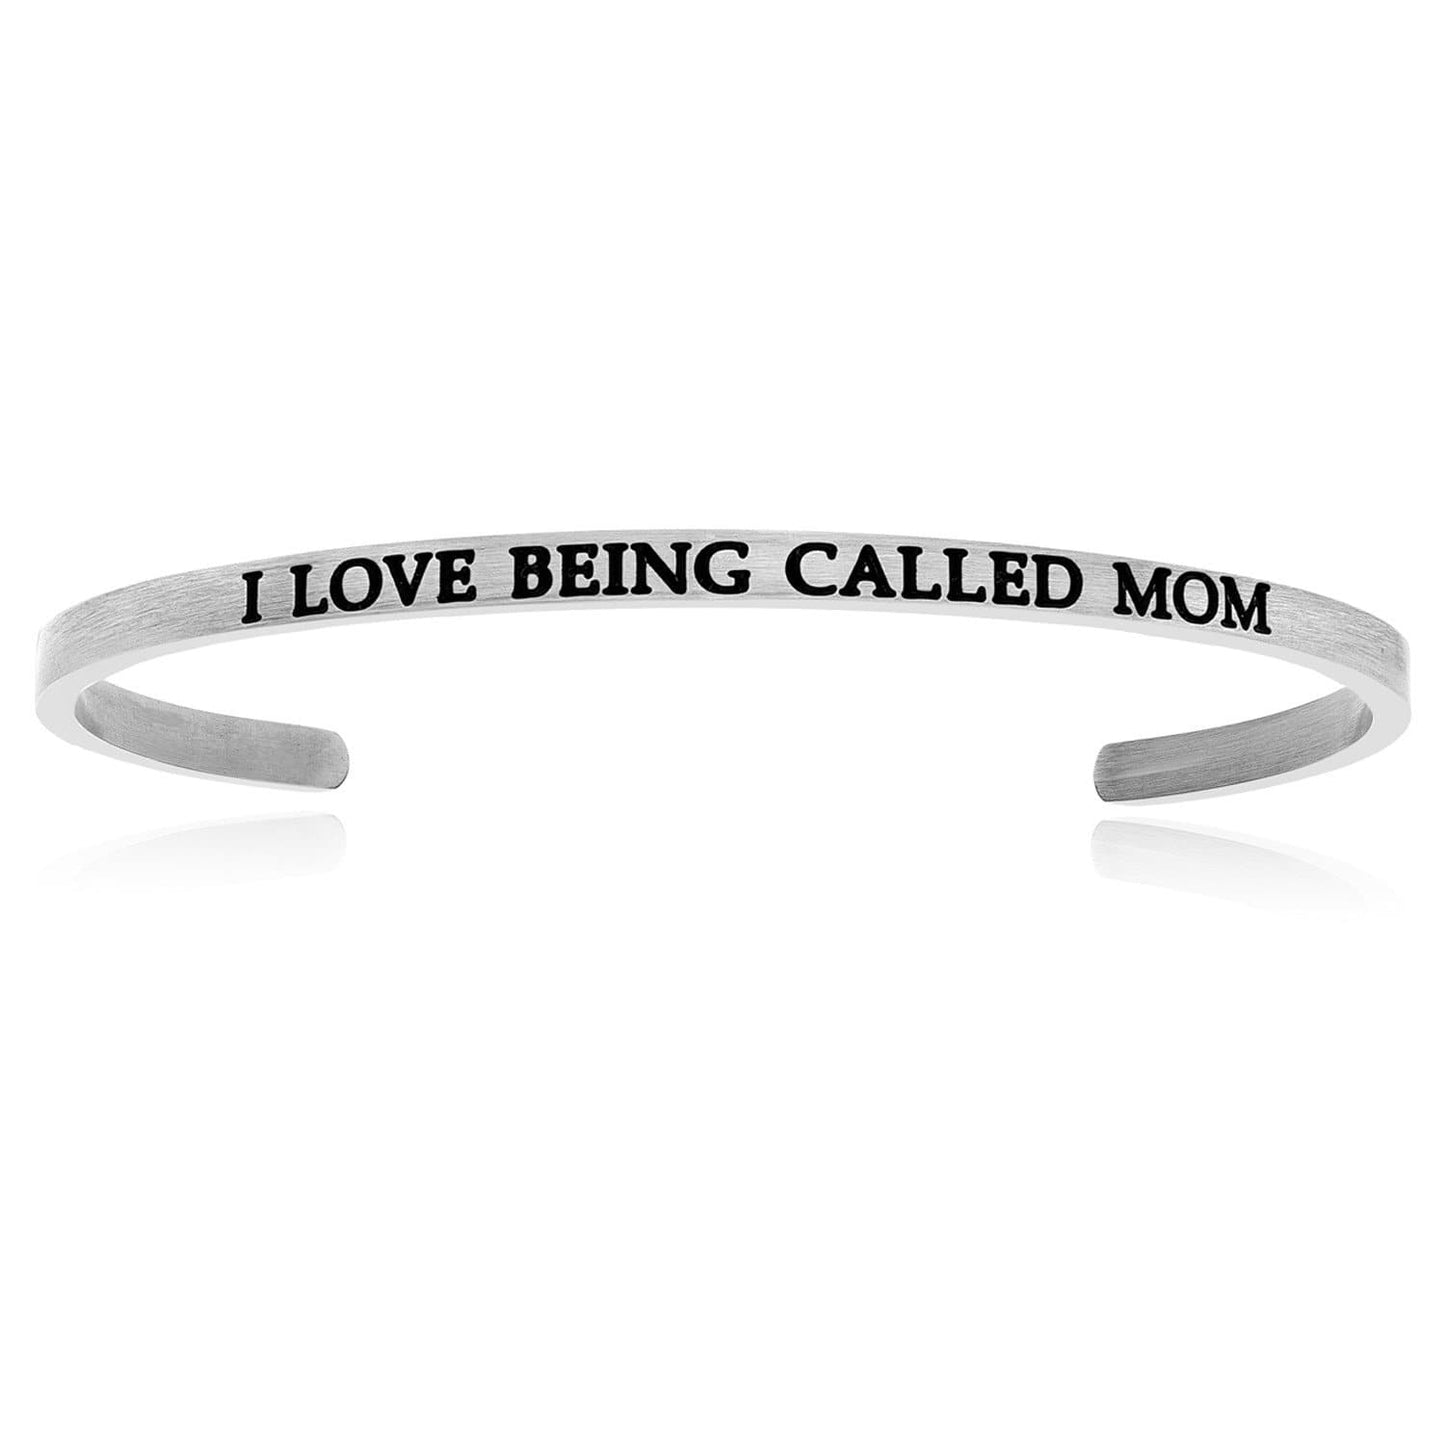 Stainless Steel I Love Being Called Mom Cuff Bracelet